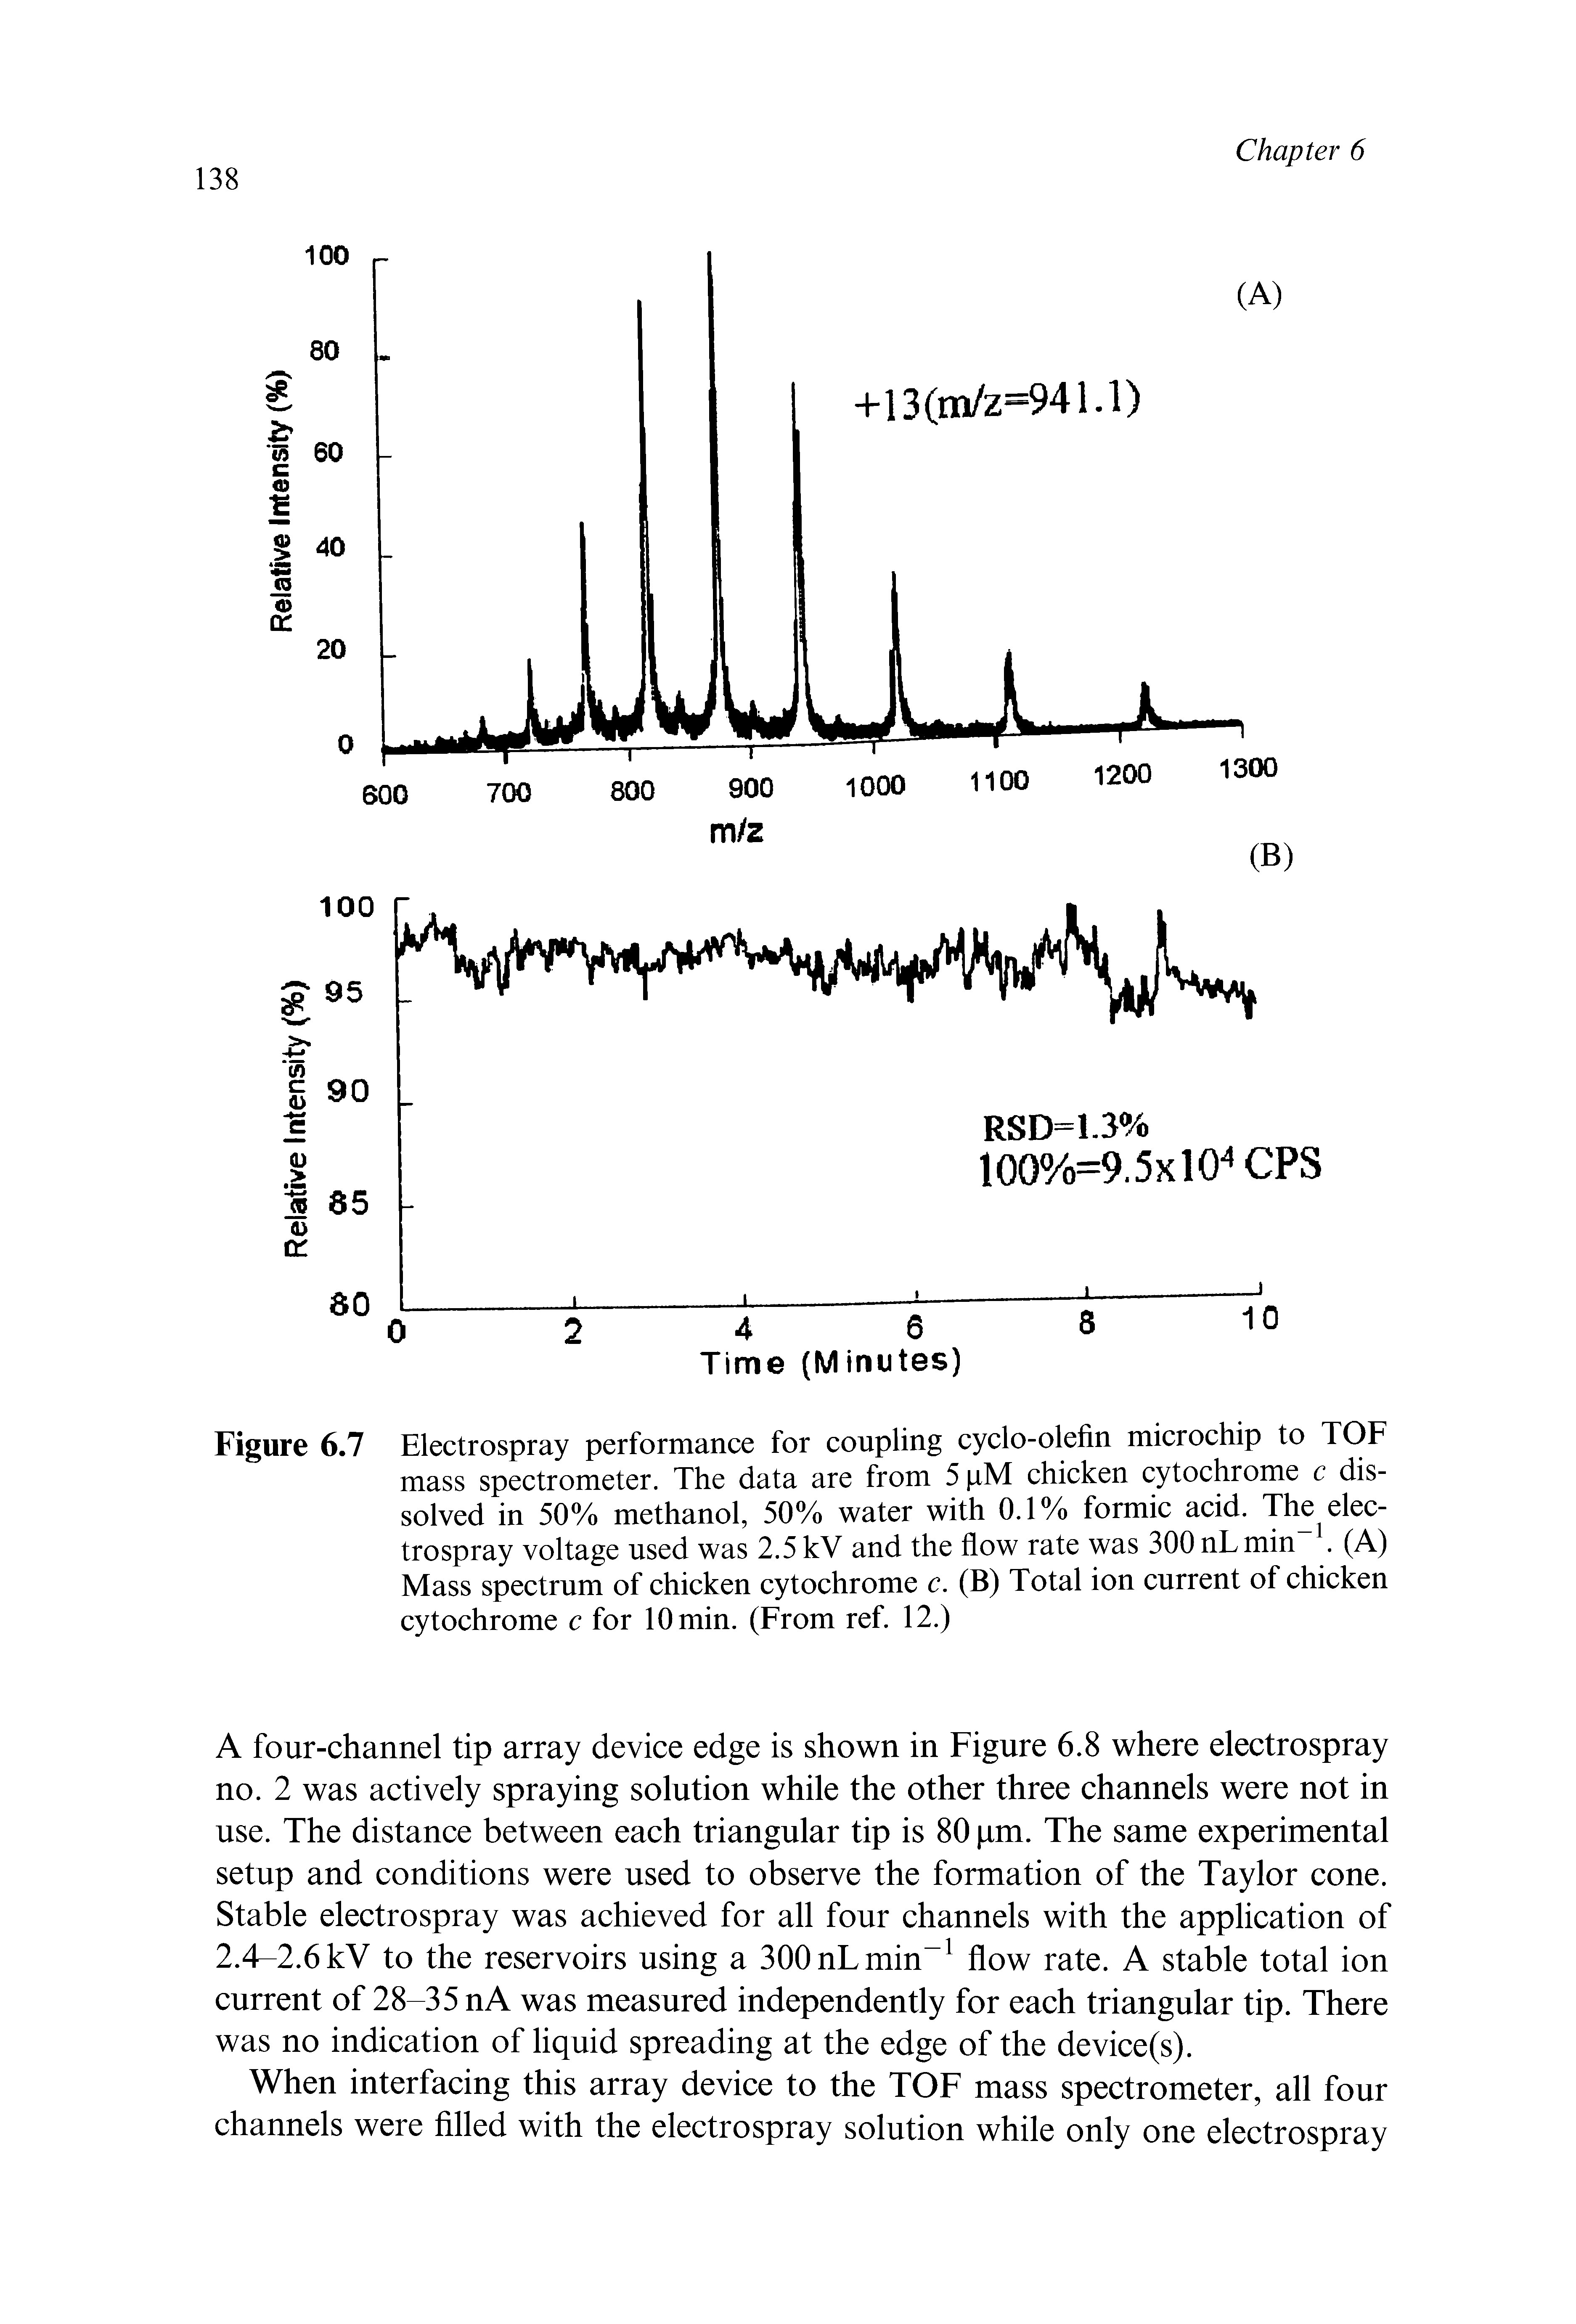 Figure 6.7 Electrospray performance for coupling cyclo-olefin microchip to TOF mass spectrometer. The data are from 5 pM chicken cytochrome c dissolved in 50% methanol, 50% water with 0.1% formic acid. The electrospray voltage used was 2.5 kV and the flow rate was 300 nLmin. (A) Mass spectrum of chicken cytochrome c. (B) Total ion current of chicken cytochrome c for 10 min. (From ref. 12.)...